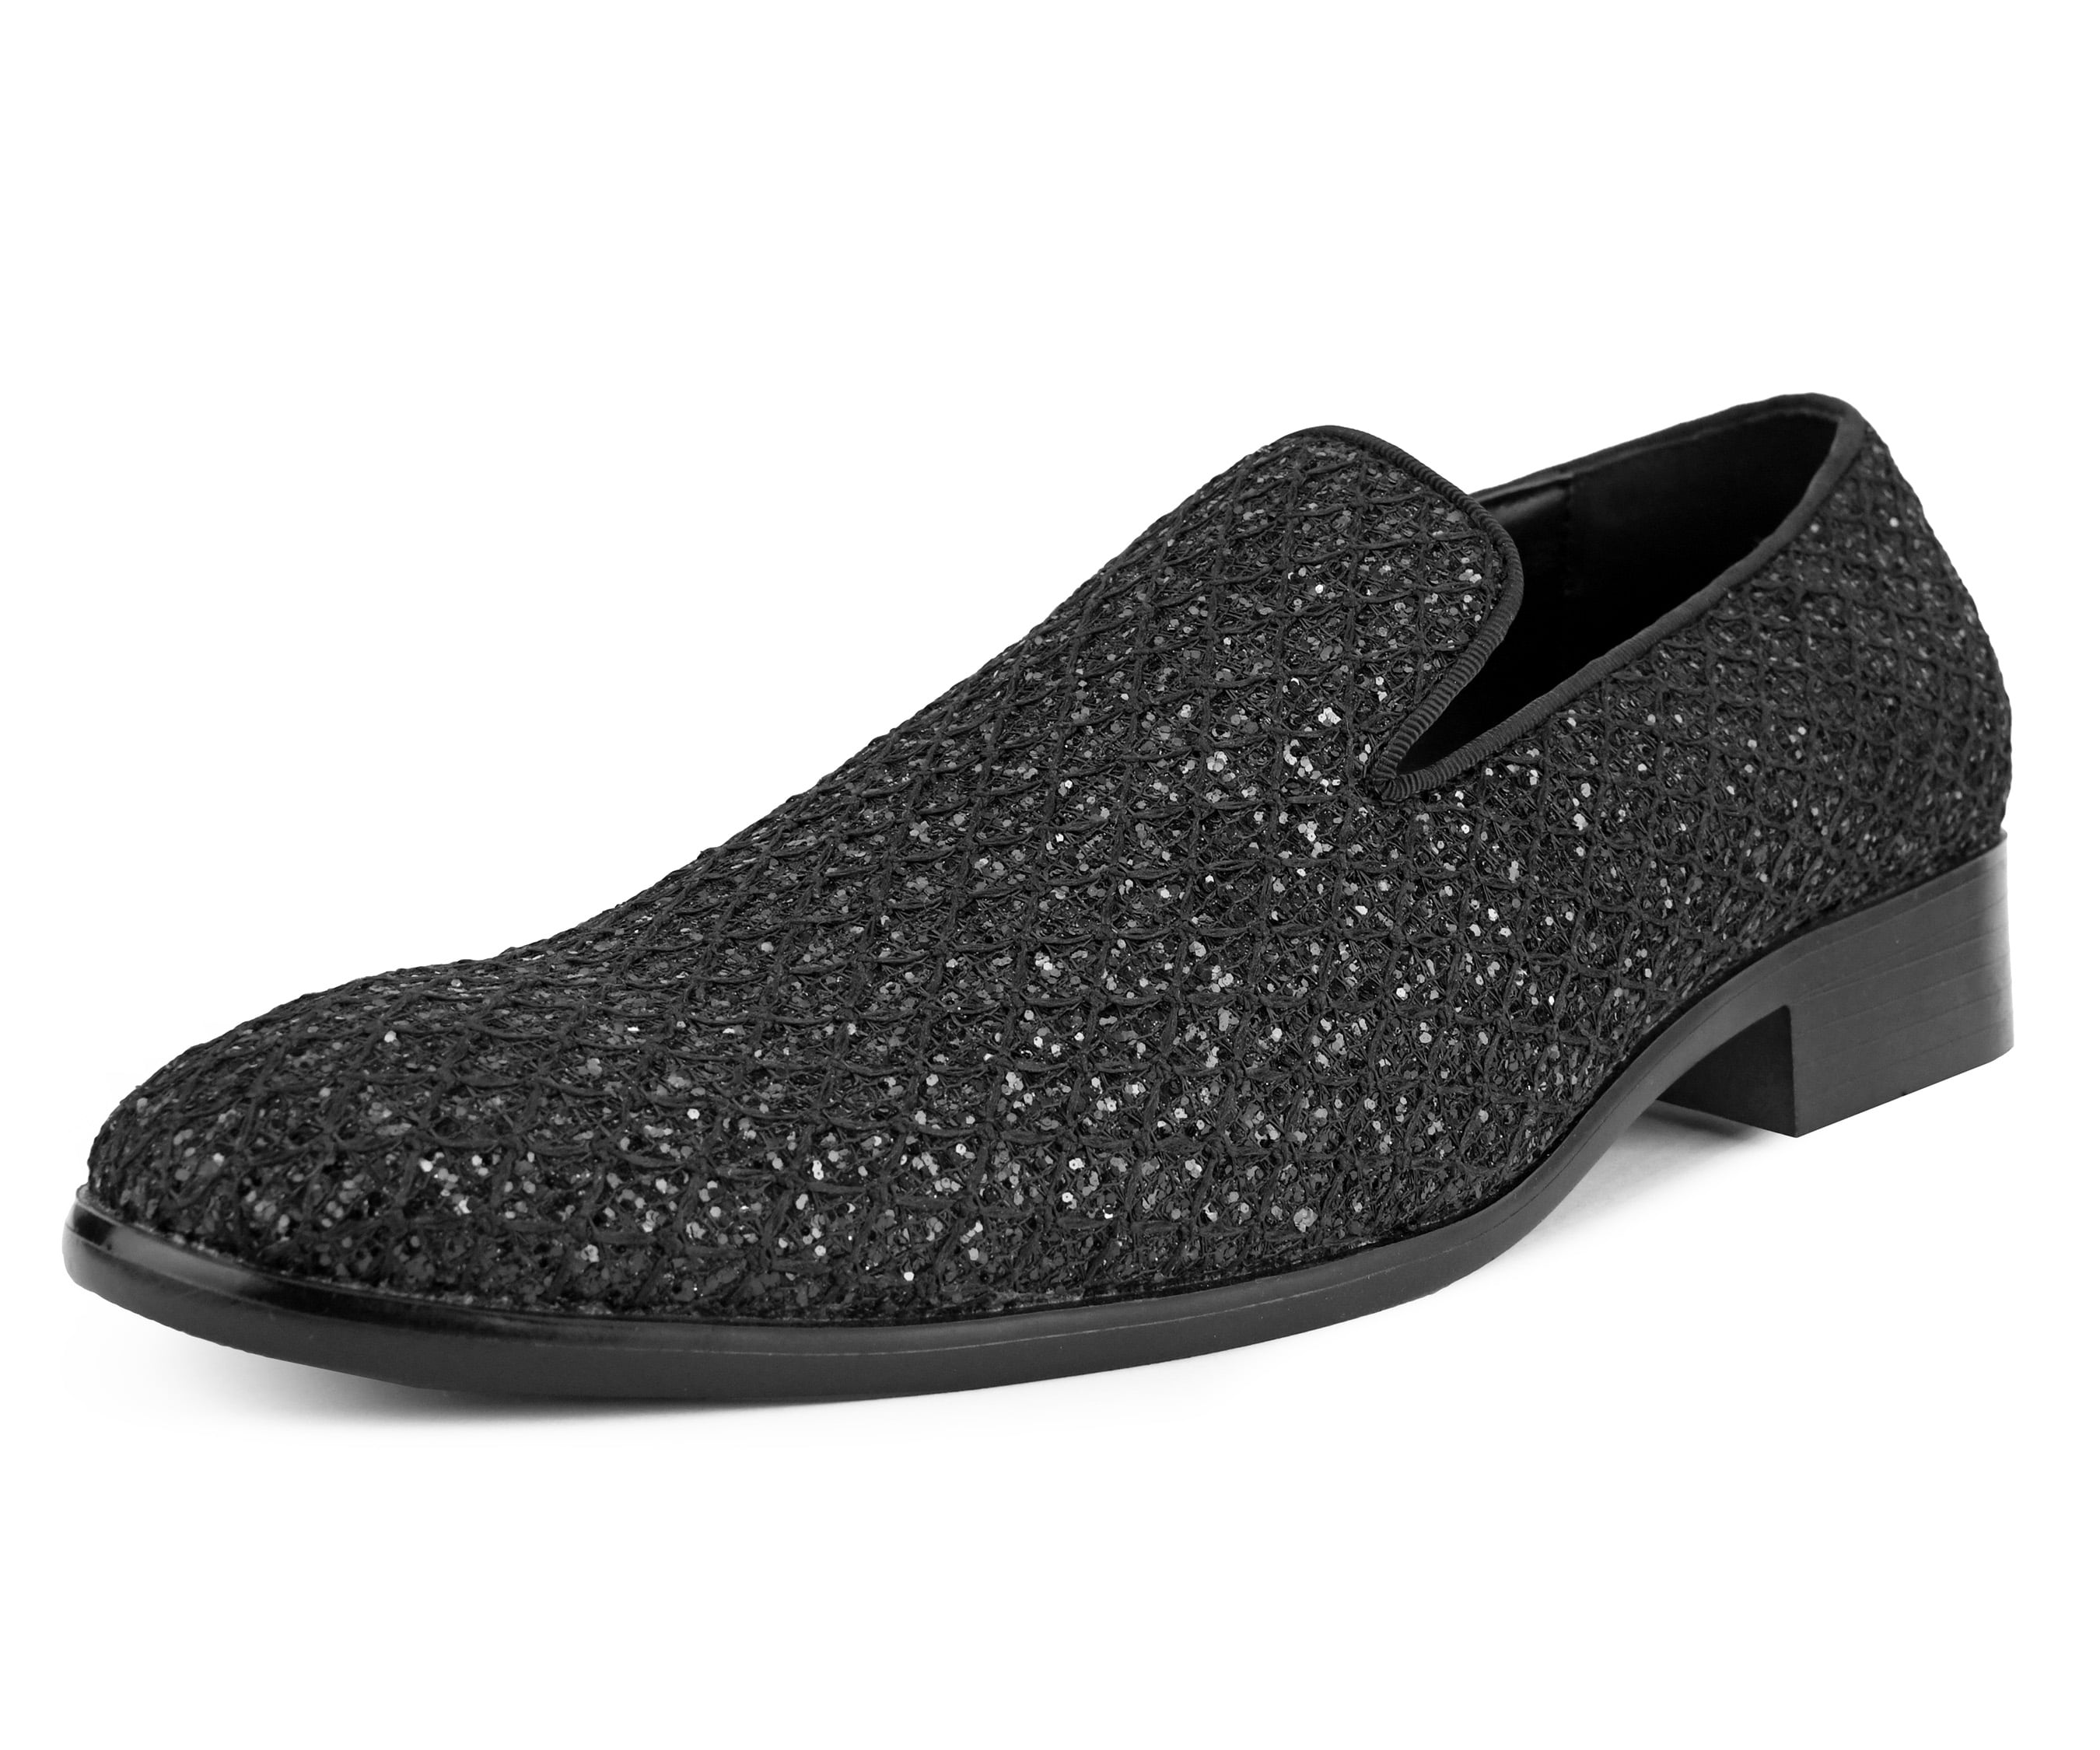 NEW  Slip On Black Sequin Smoking Loafers Tuxedo Casual Mens Dress Shoes BY ROYL 